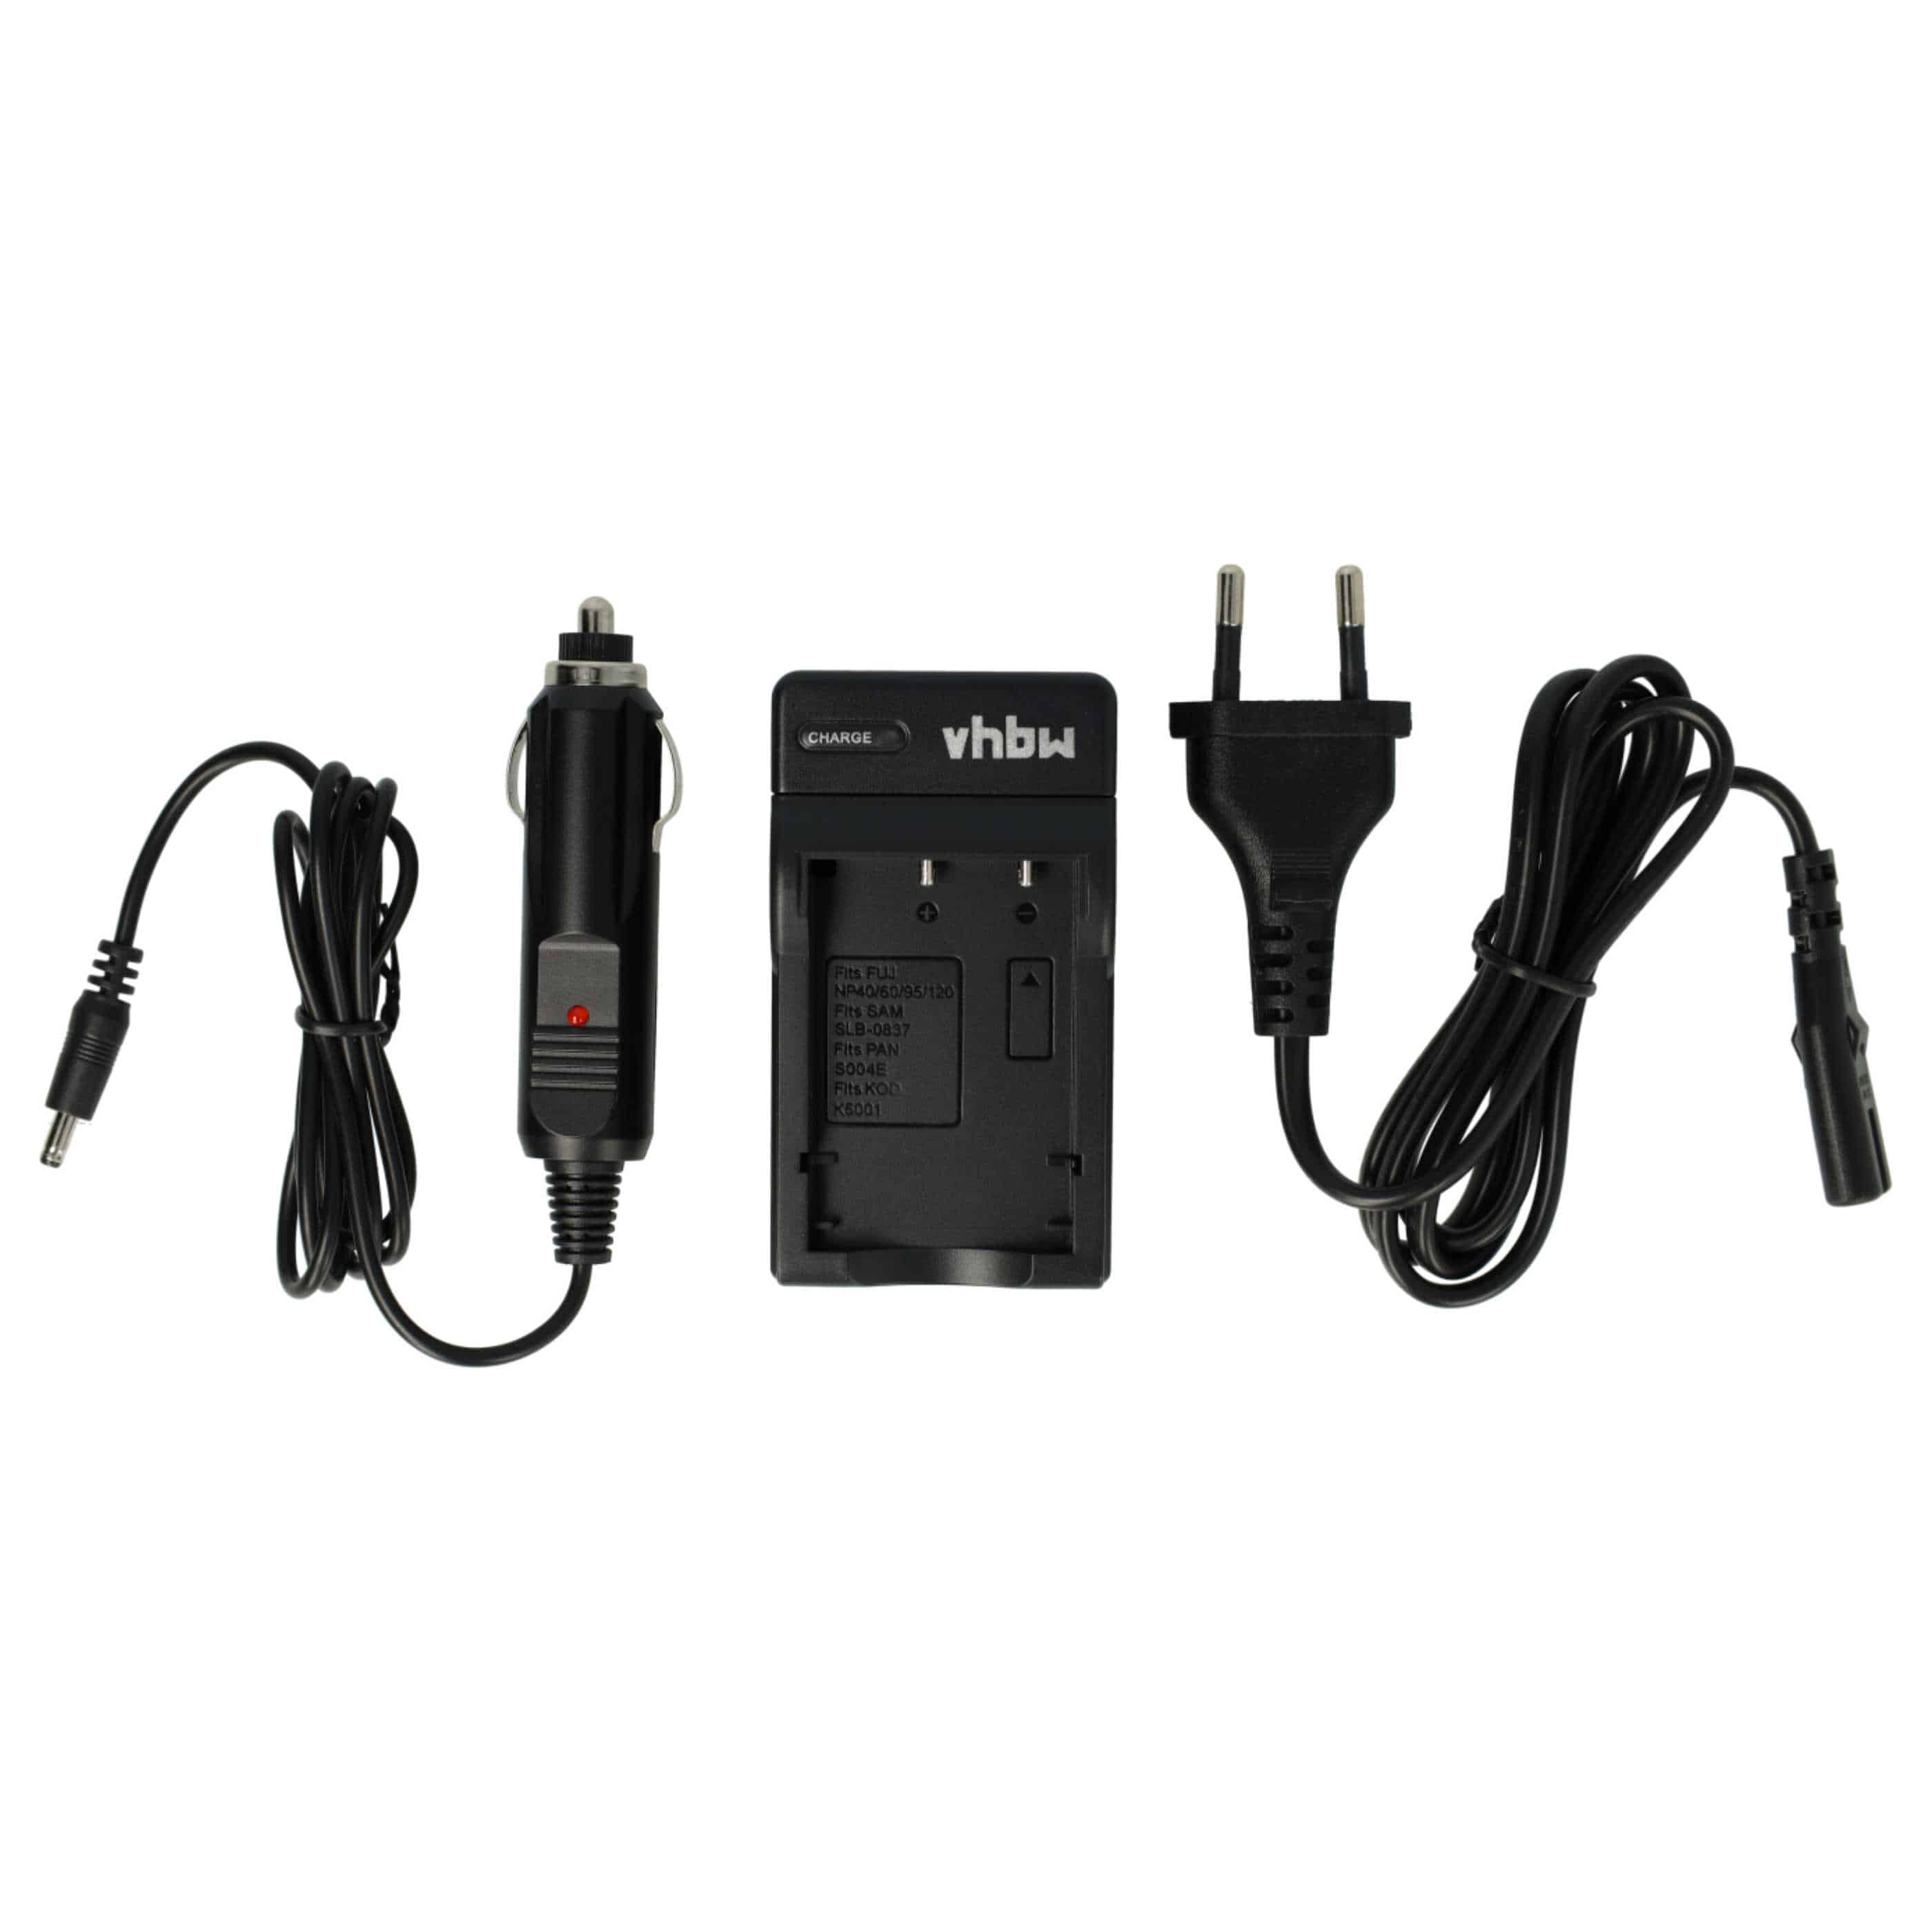 Battery Charger suitable for Hyundai Digital Camera - 0.6 A, 8.4 V